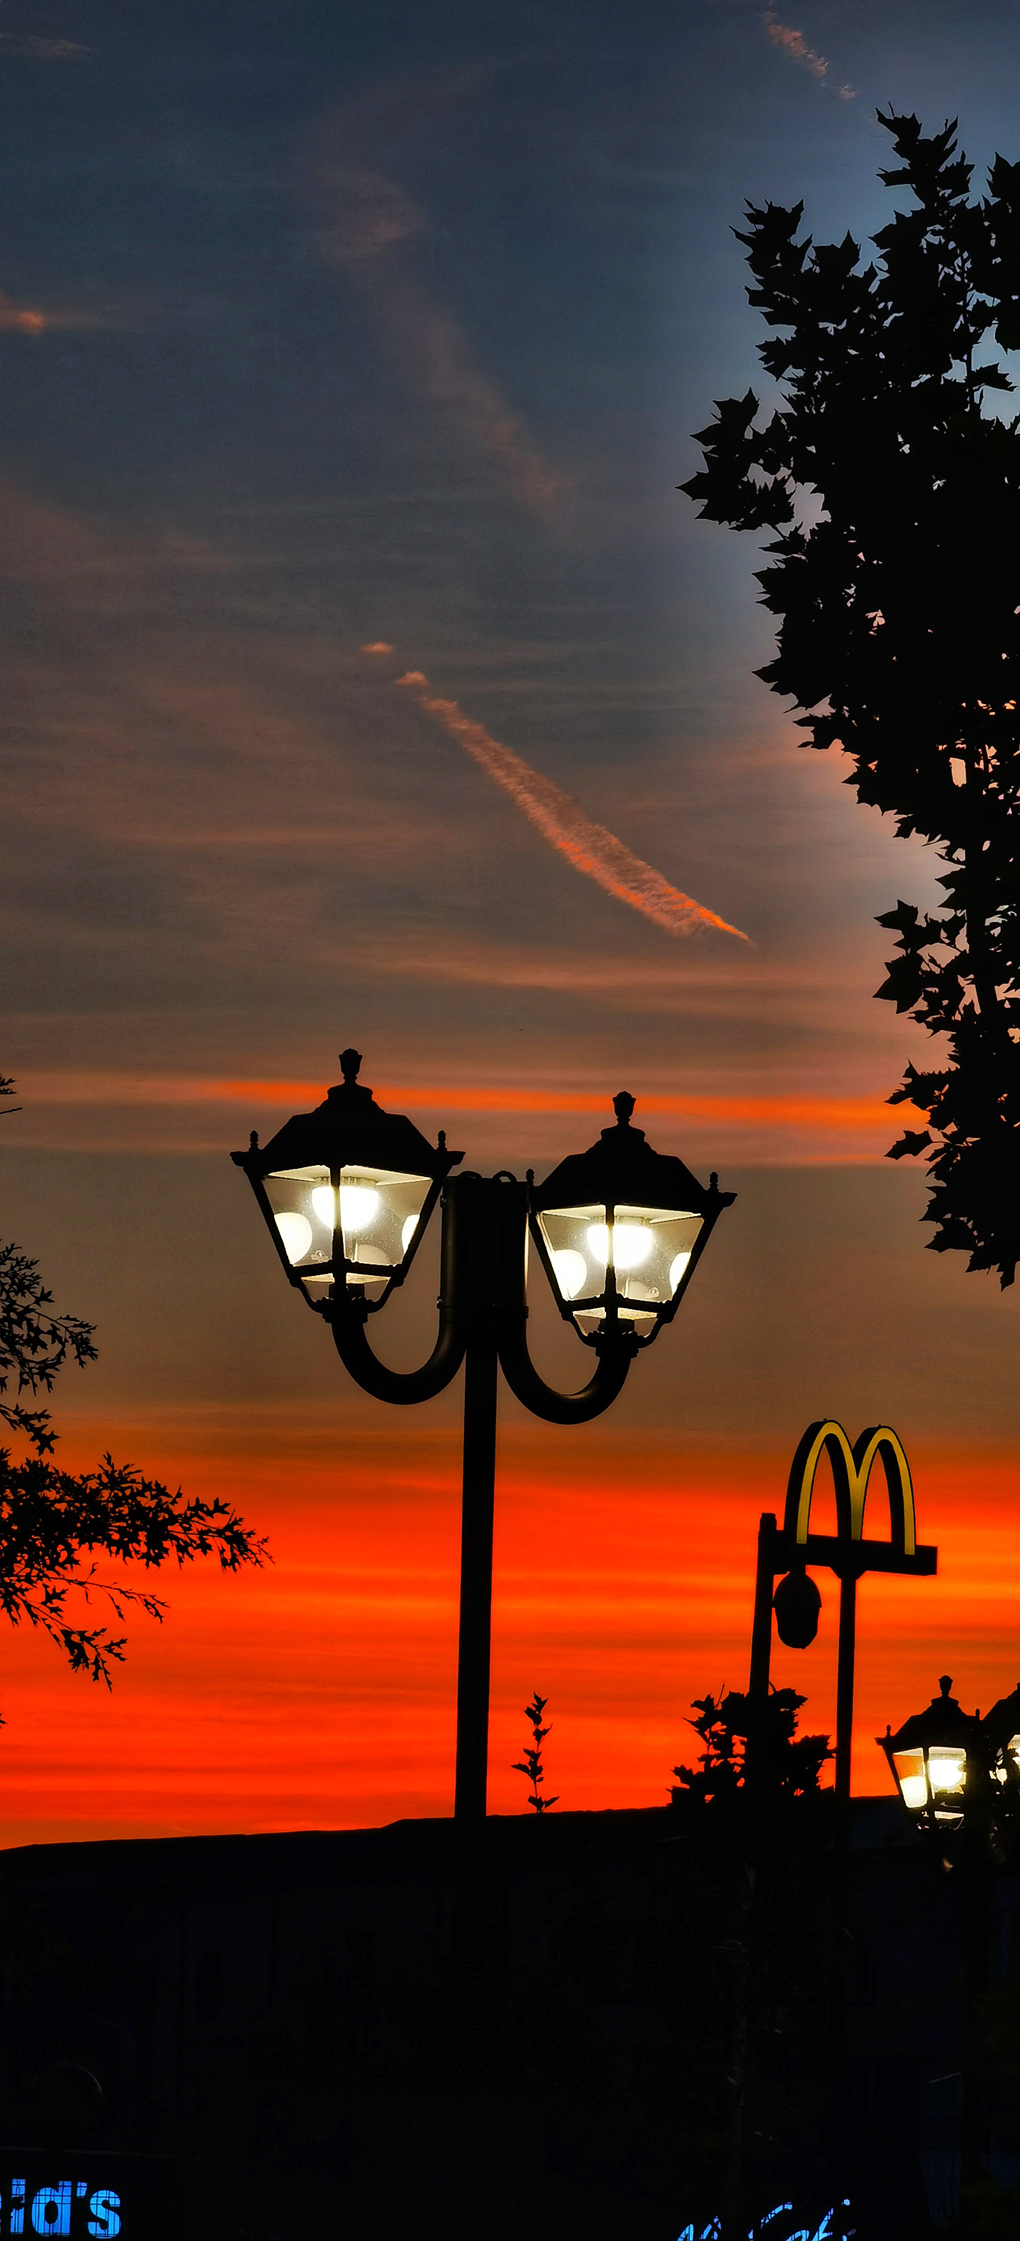 Lamp posts and McDonalds sign in a sunset